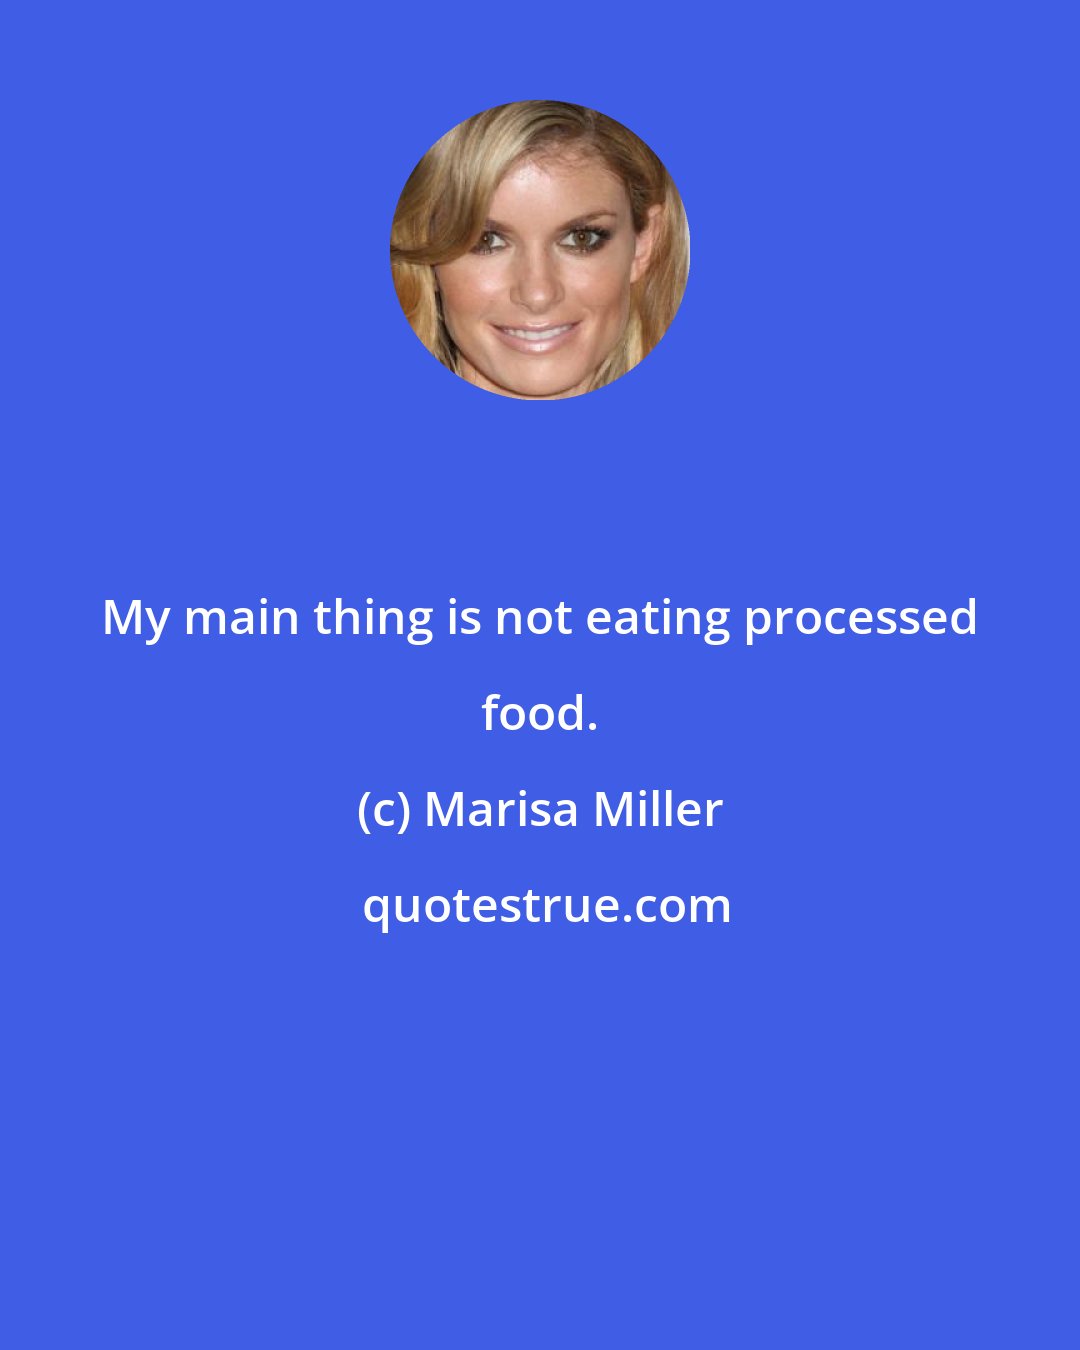 Marisa Miller: My main thing is not eating processed food.